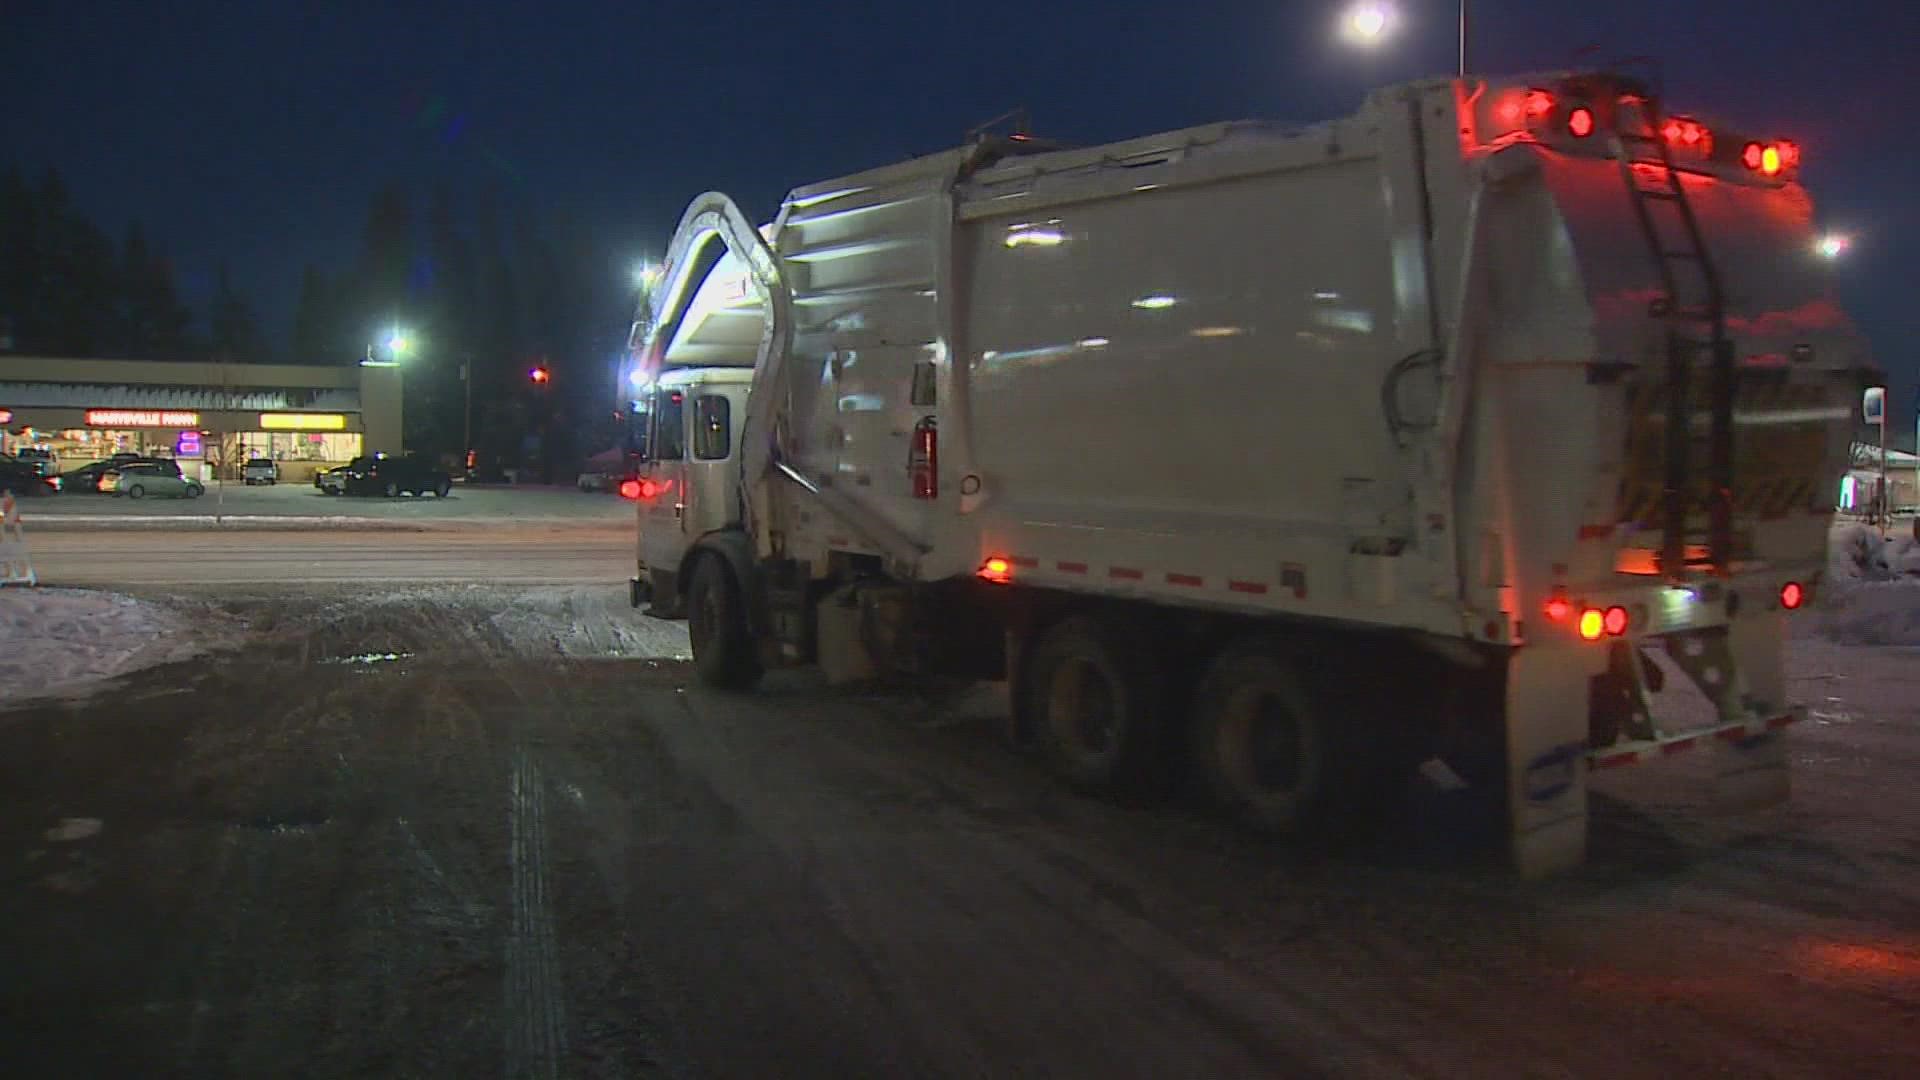 The city's solid waste department is accepting trash and recycling drop-offs this week after canceling normally scheduled waste pick-up due to icy road conditions.